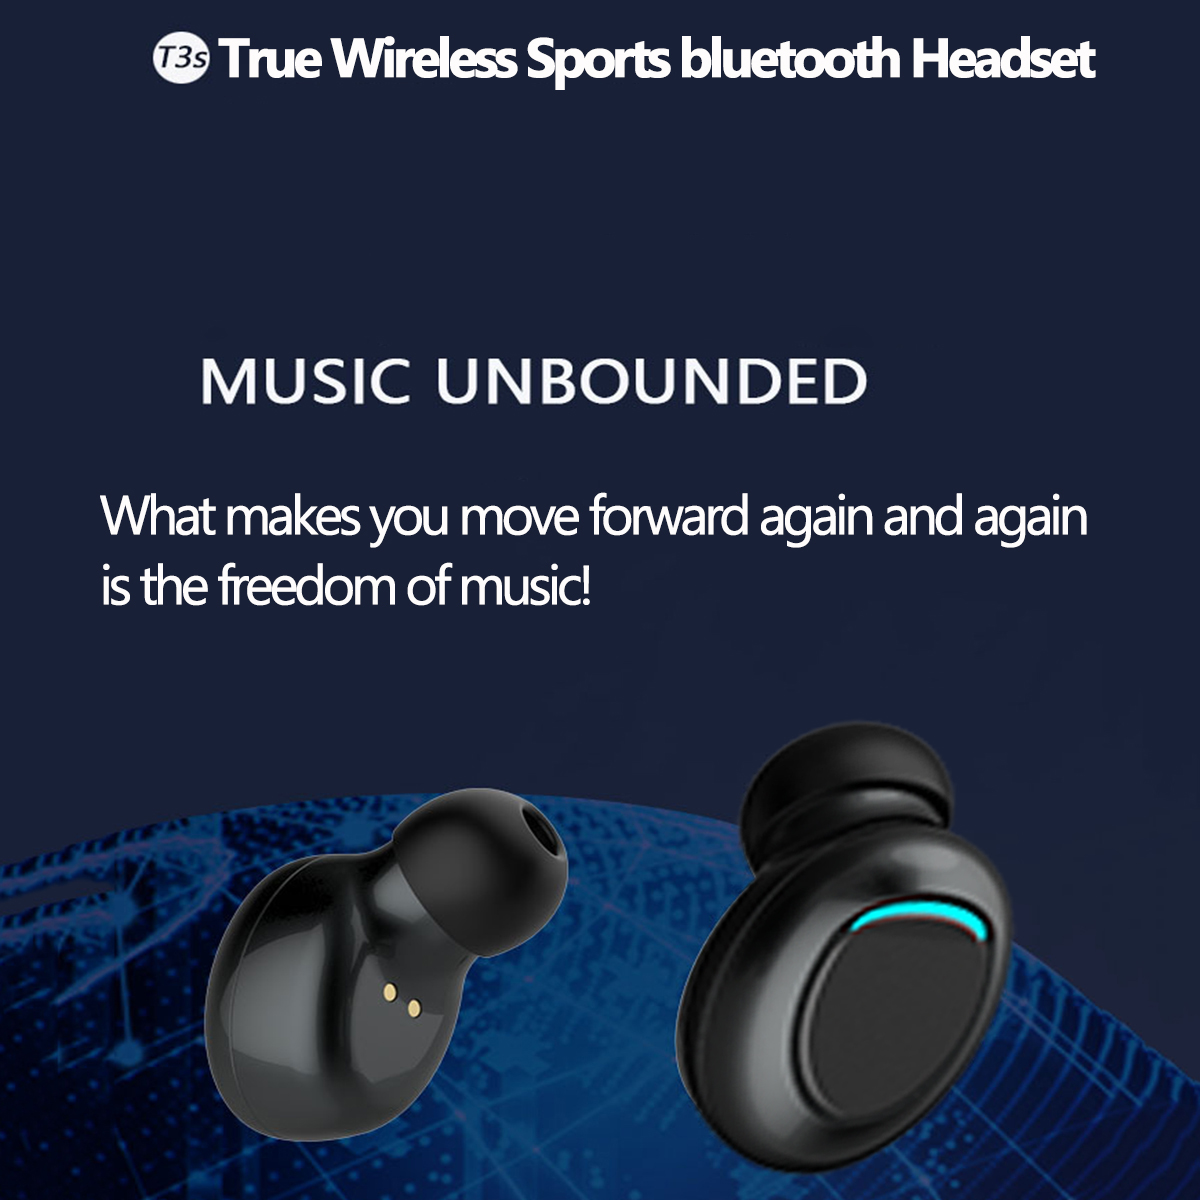 Dual-Digital-Display-True-Wireless-Headset-Button-Touch-bluetooth-50-Earphone-with-Portable-Charging-1565020-4